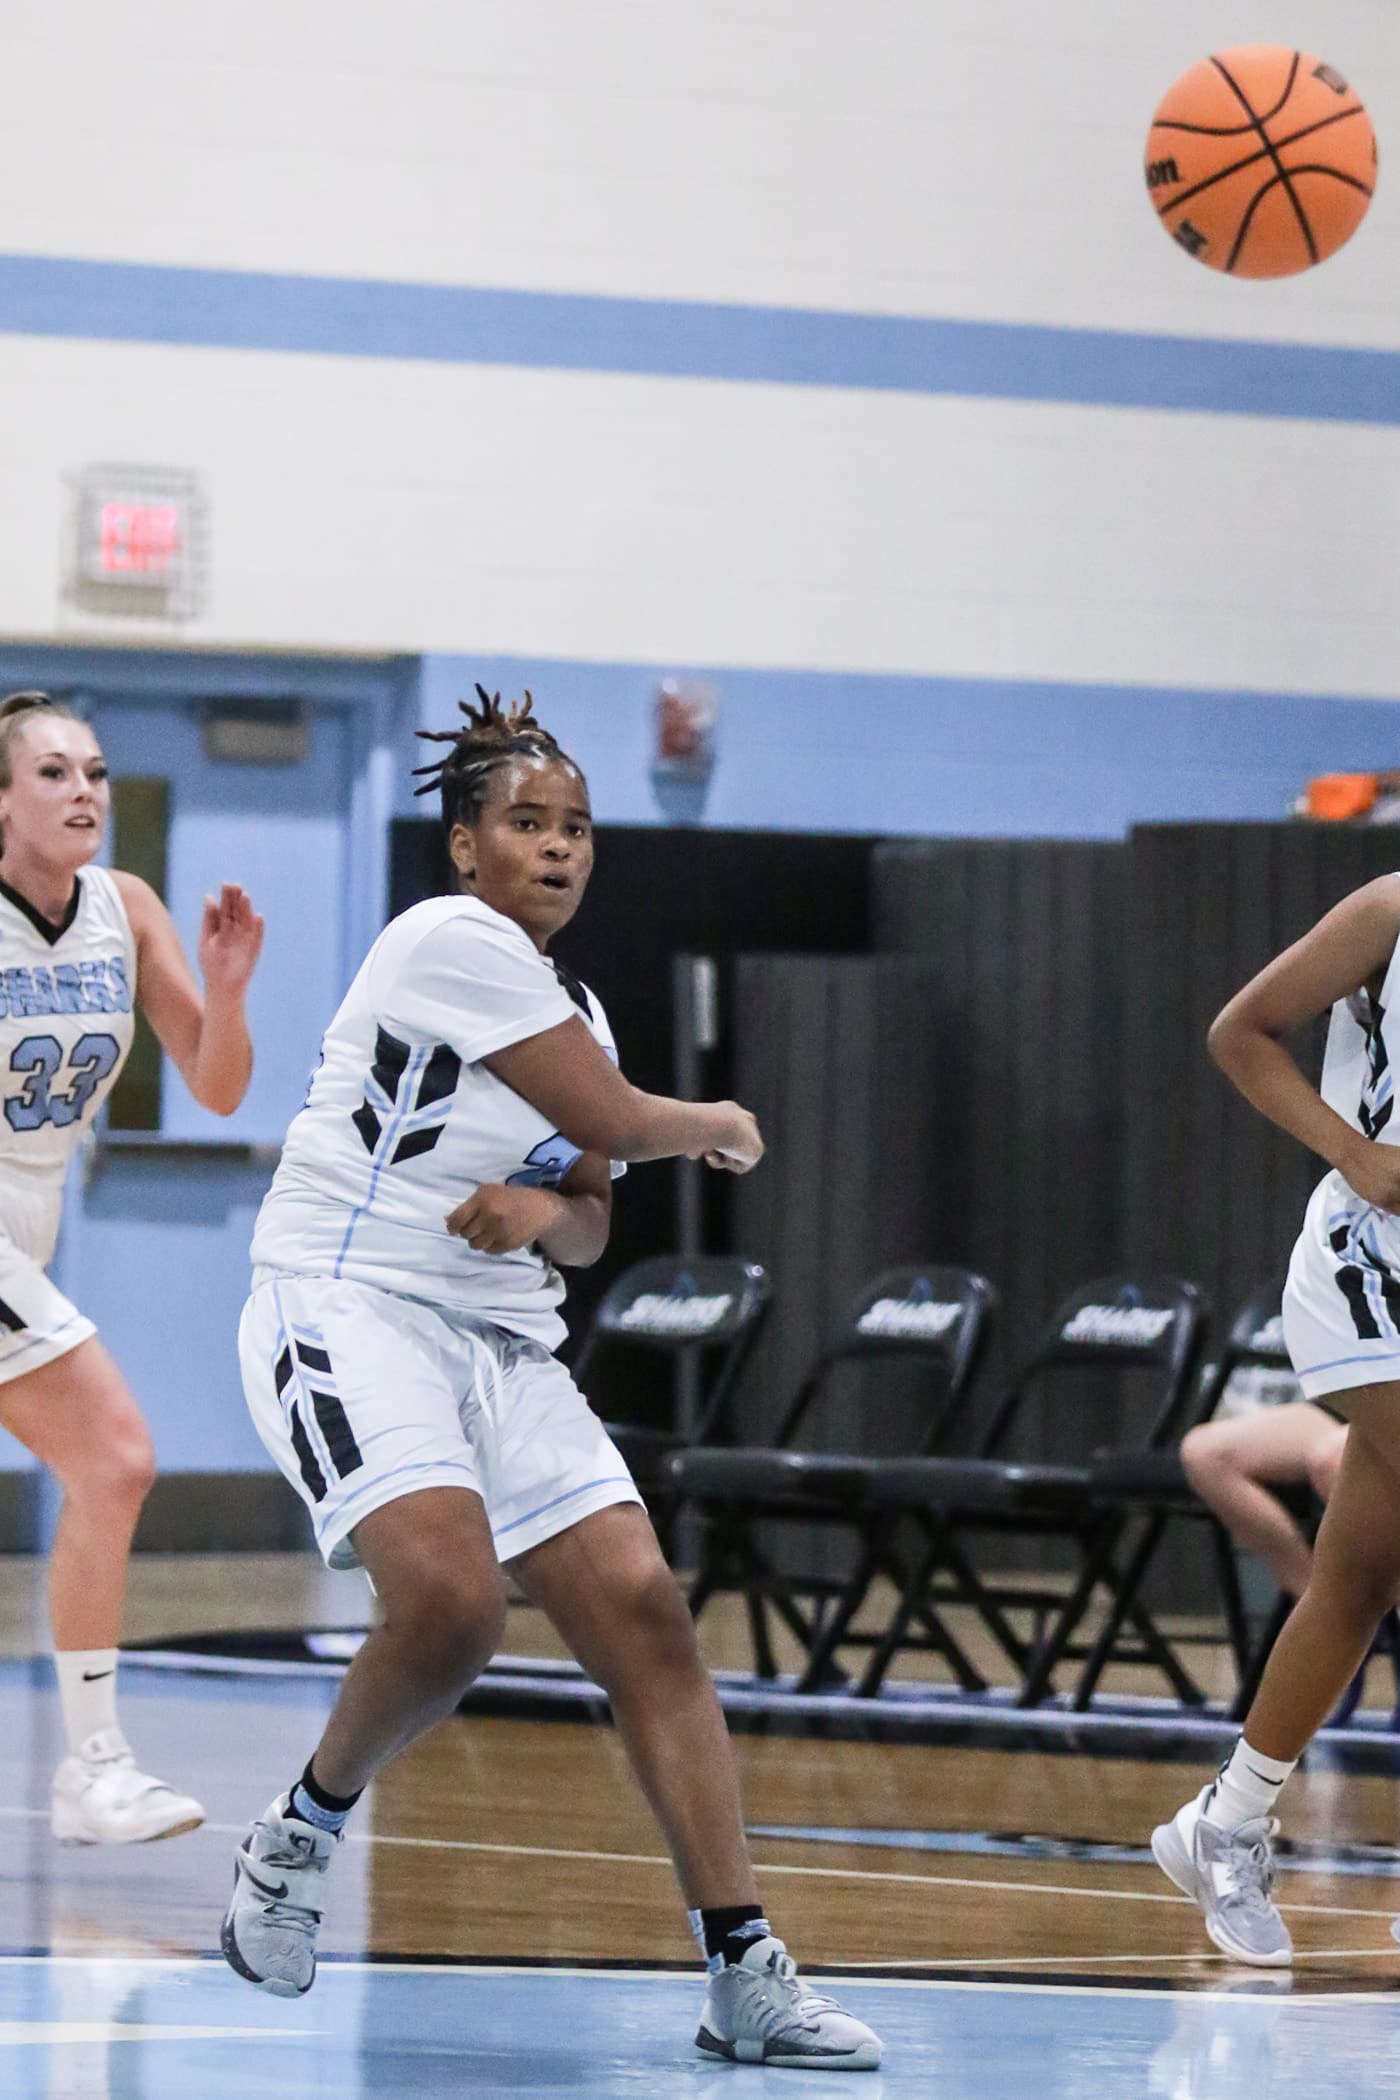 Sharks 24 Jr. Zipporrah Charlson passes the ball fast across the court to another player. Photo by Cheryl Clanton.